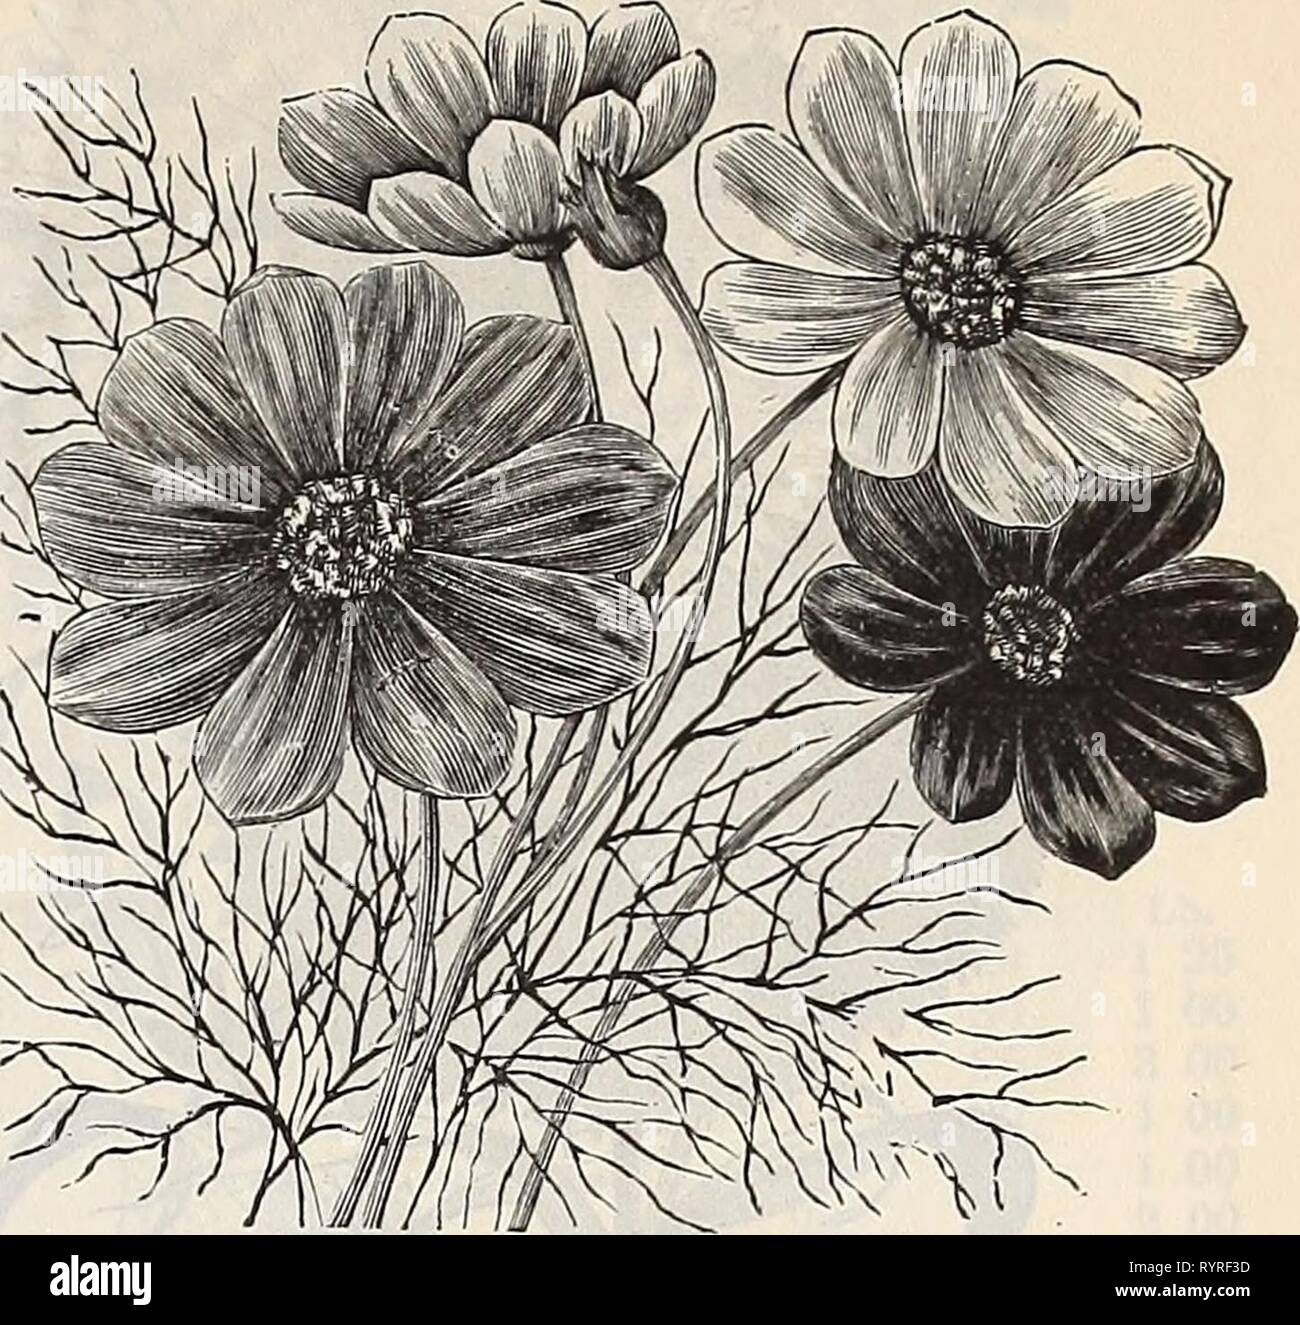 Dreer's quarterly wholesale price list Dreer's quarterly wholesale price list : seeds plants bulbs tools fertilizers sundries &c . dreersquarterlyw1897henr Year: 1897  Cineraria—Drekr's Prize Dwakf. Carnation—{Continued). Carnation Marguerite. This beautiful race of Carnation has claimed the admira- tion of all who have grown it, flowering in four months after sowing the seed, beautiful colors and delicious clove perfume. Trade pkt. Peroz. Pure white $ 50 Bright Rose 50 Brilliant Scarlet 50 Crimson 50 Purple 50 Striped 50 Mixed 30 Celosia, Glasgow Prize, crimson, excellent for bedding 25 Queen Stock Photo